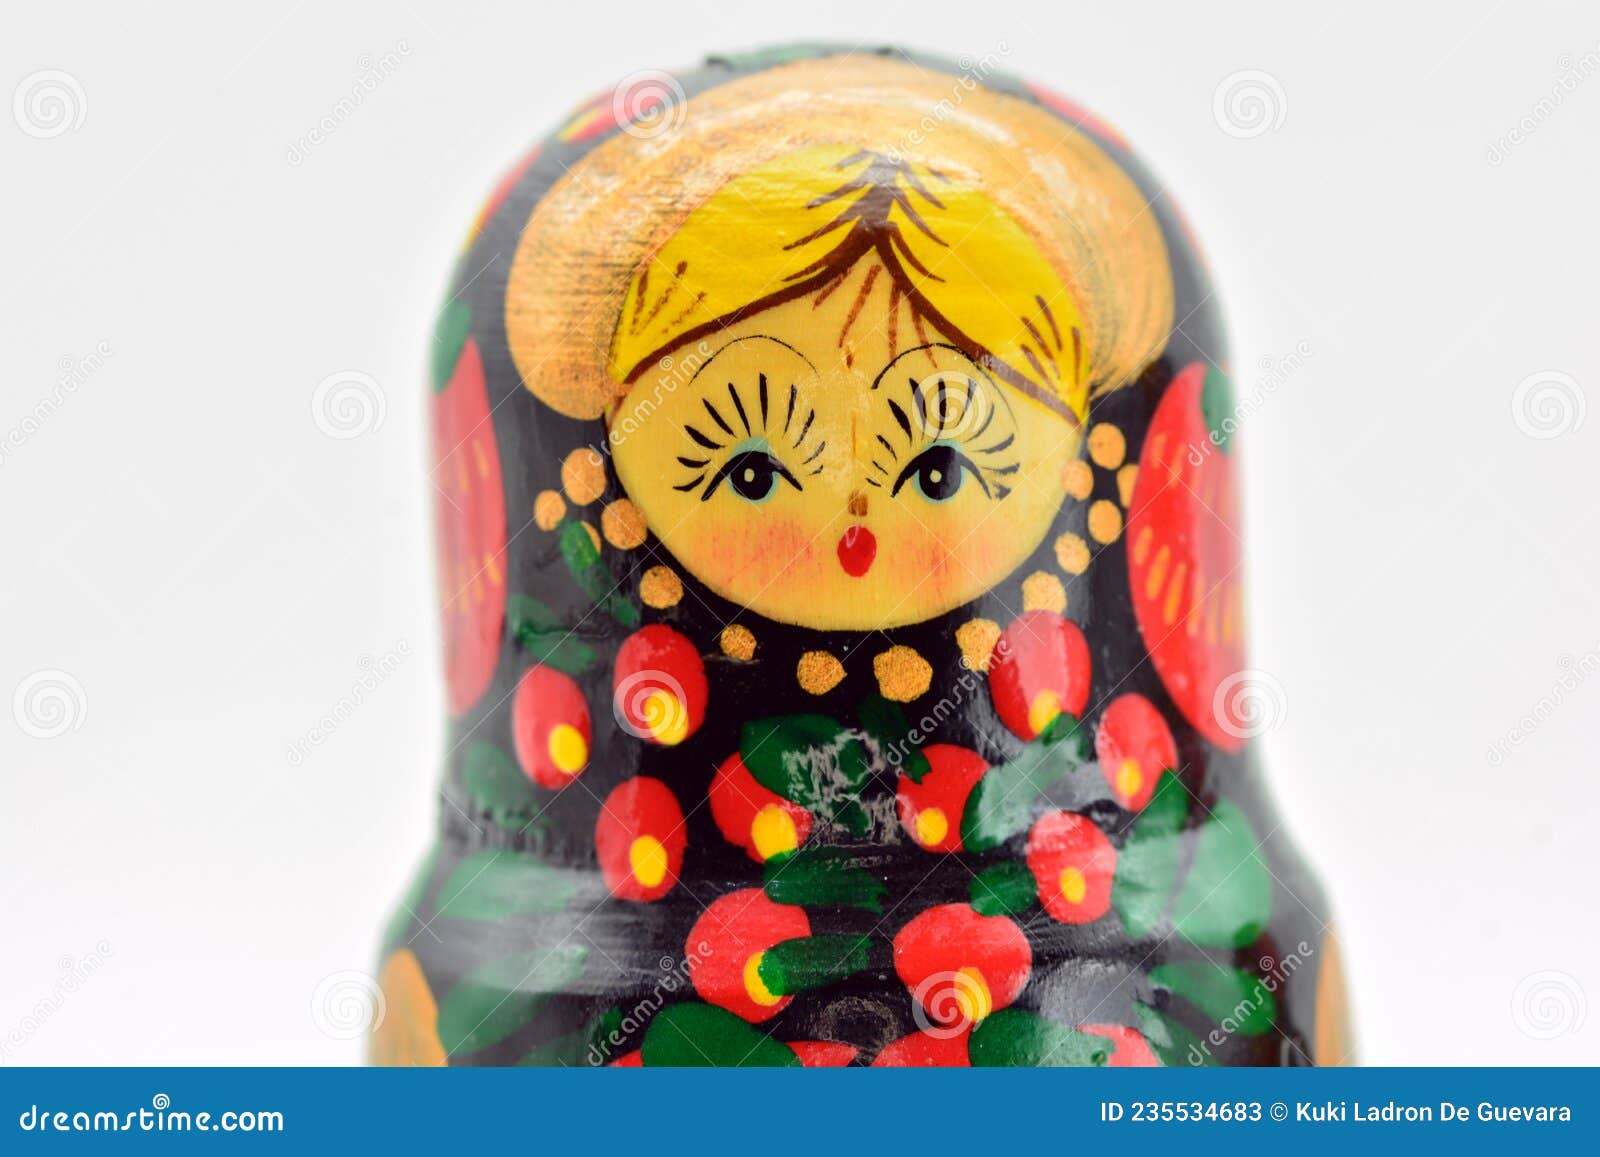 family of traditional russian dolls